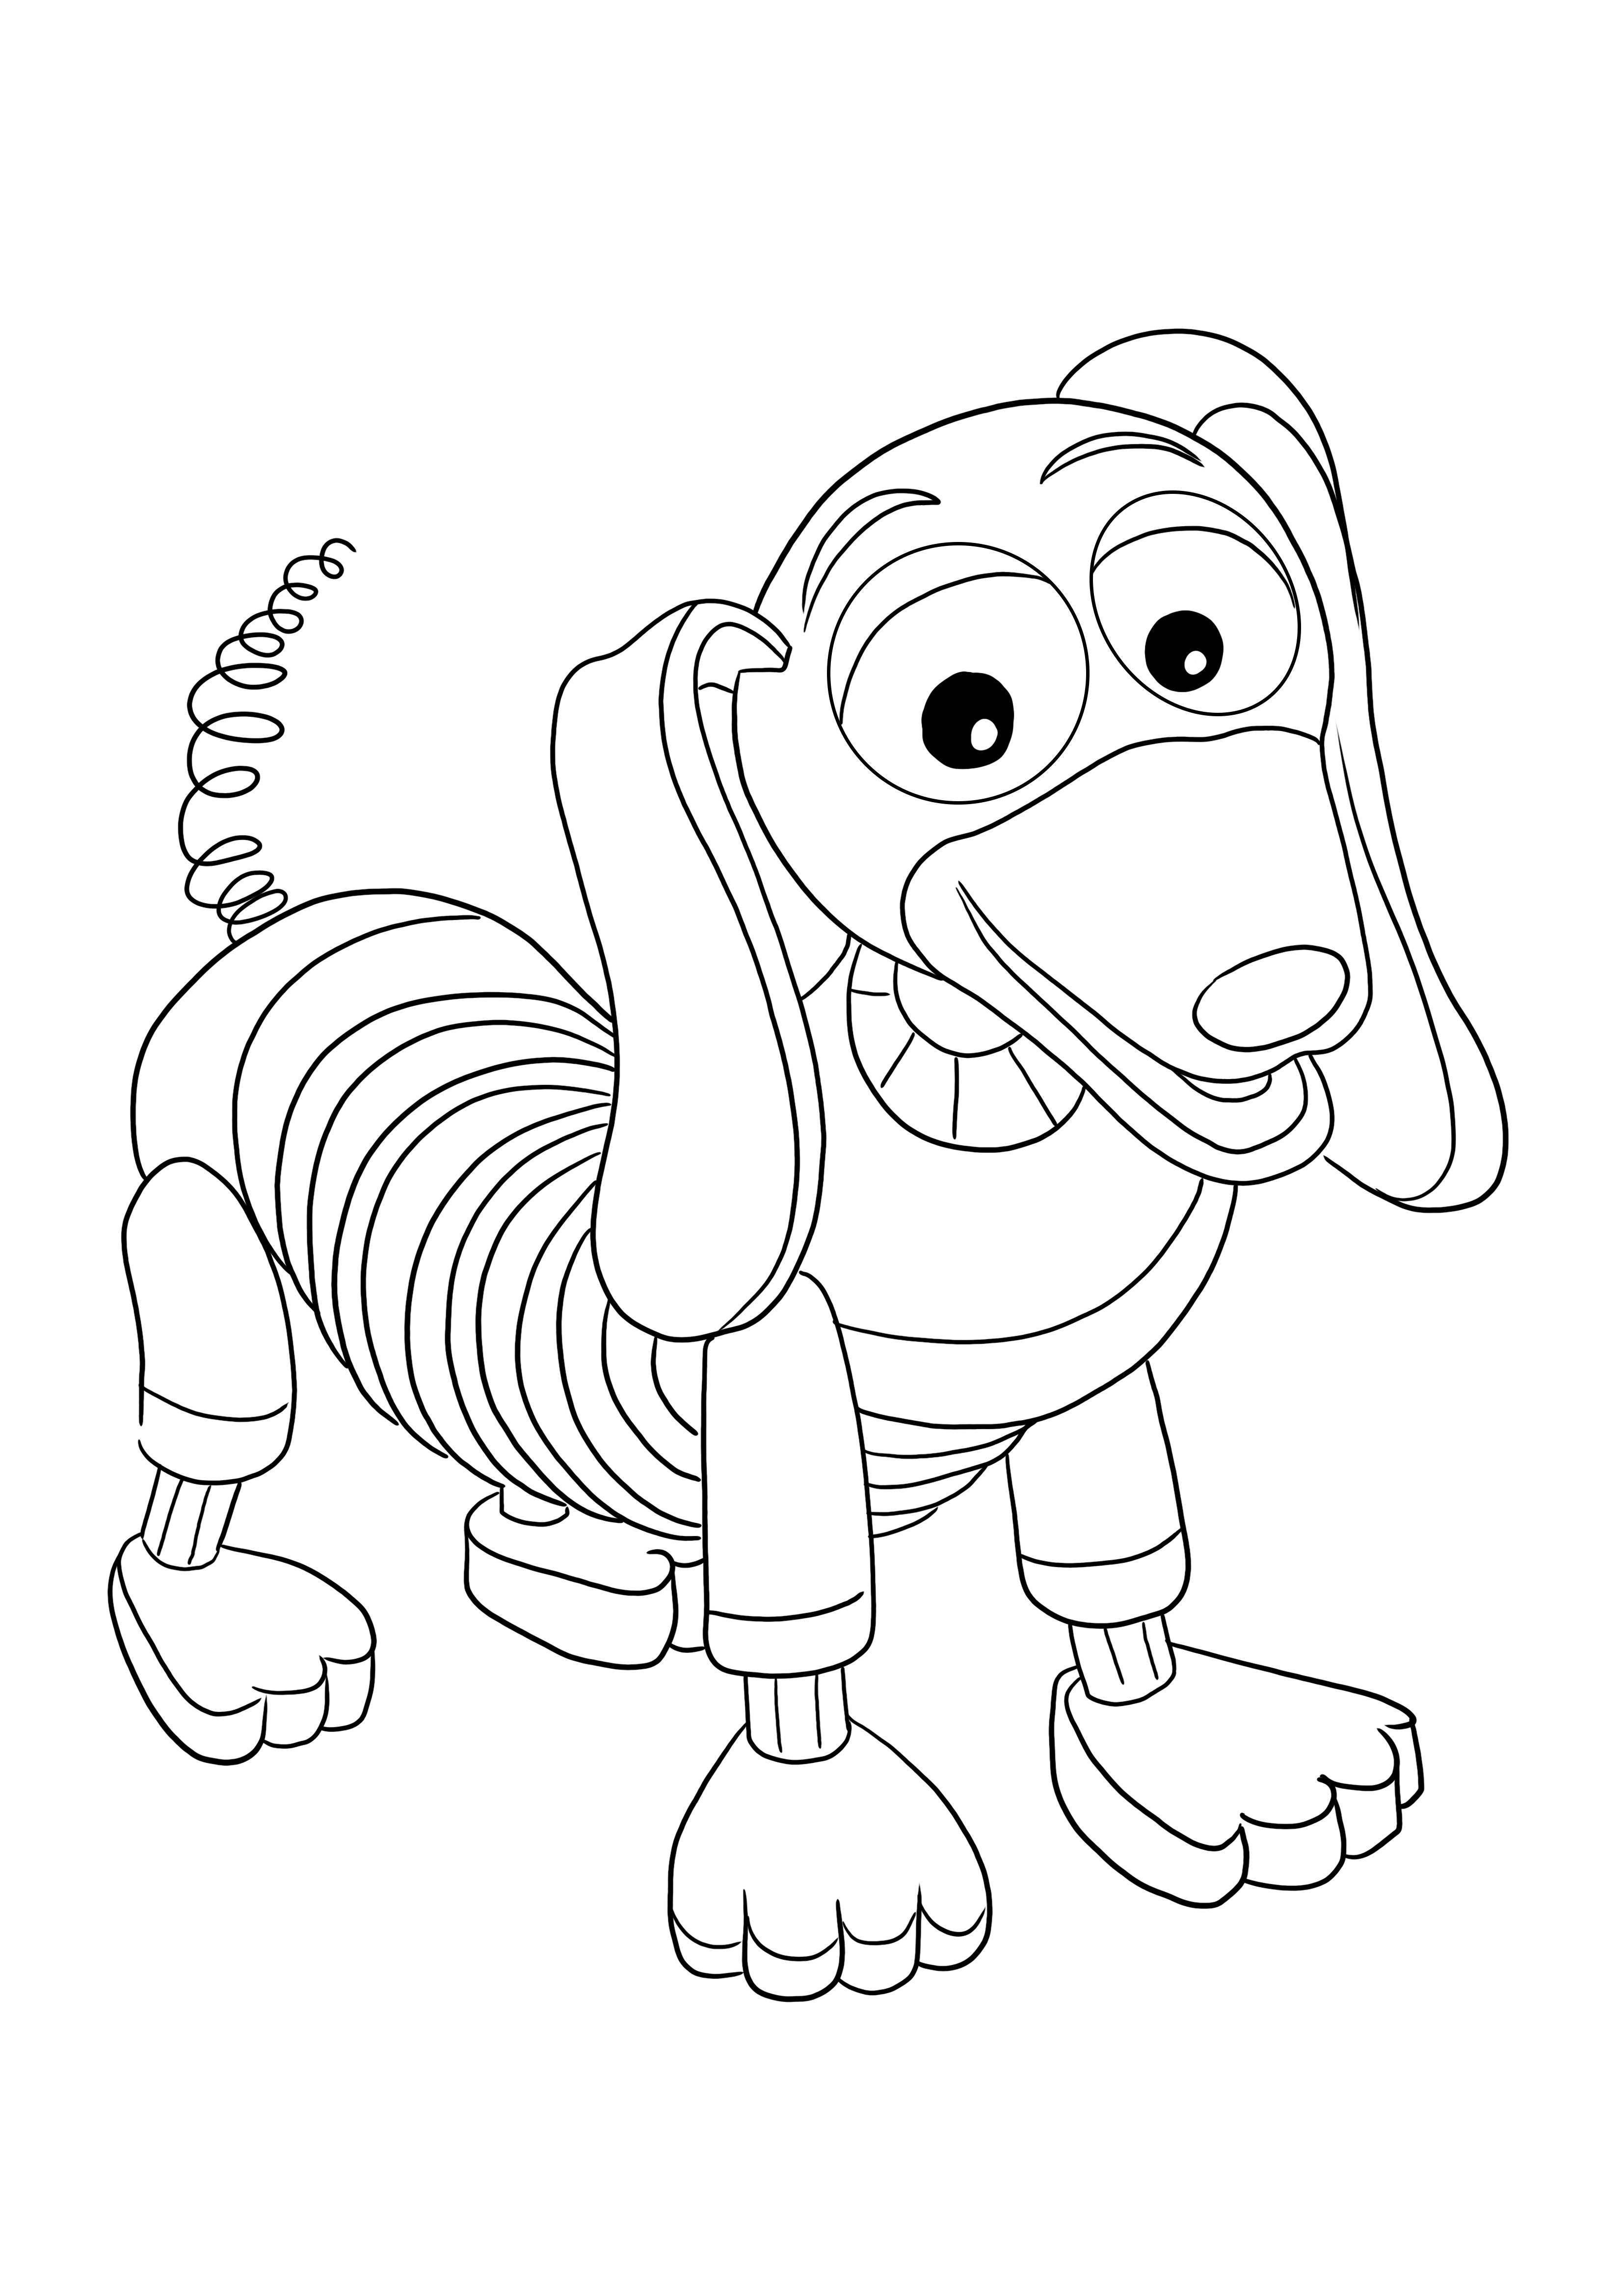 Slinky Dog for free printing and coloring sheet for kids of all ages